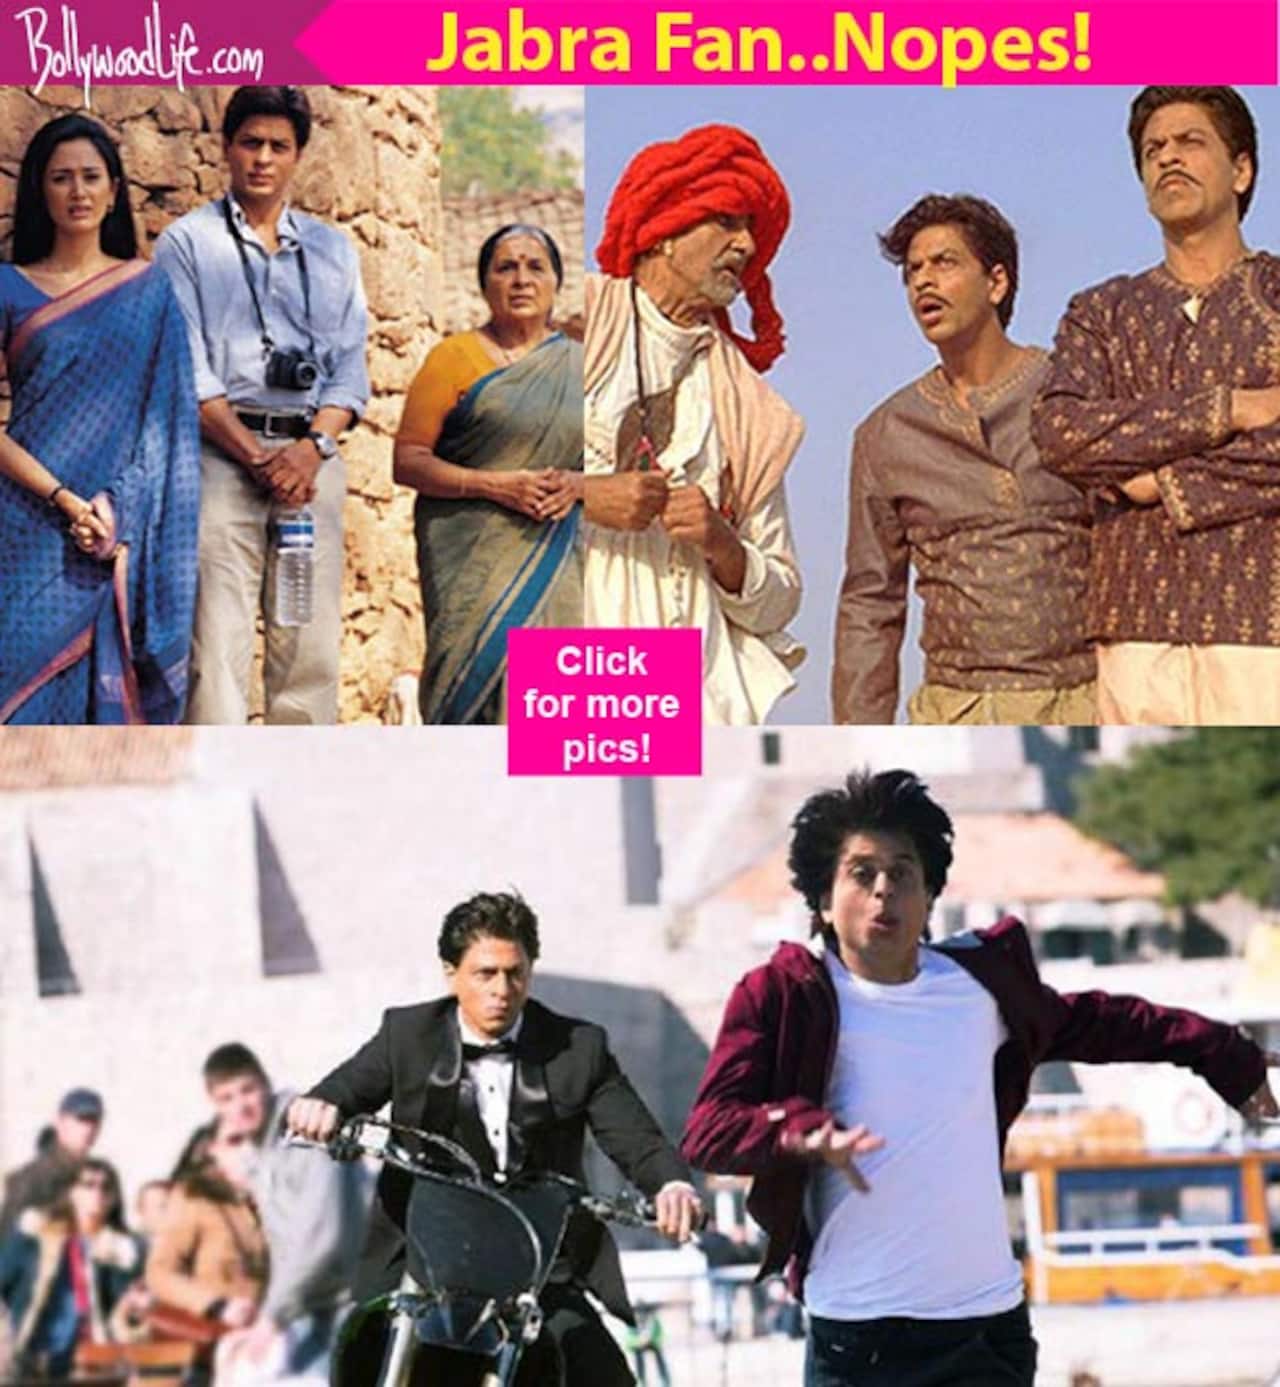 FAN, Swades, Paheli - 7 times when Shah Rukh Khan's BRILLIANT performances were let down by the box office!